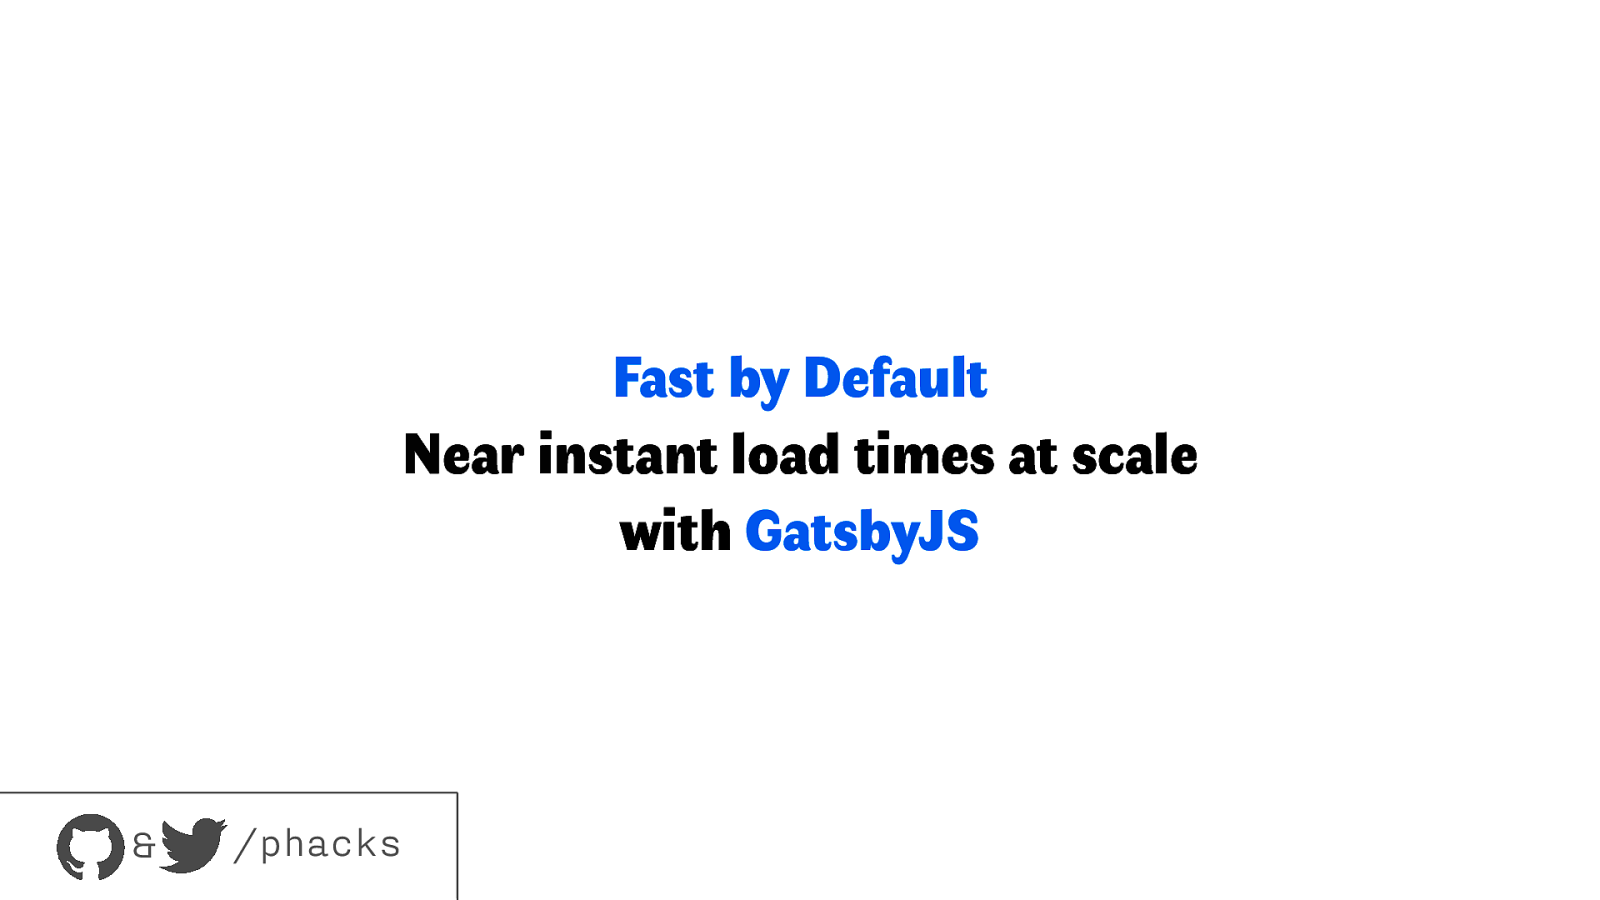 Fast by Default: Near Instant Load Times at Scale with GatsbyJS